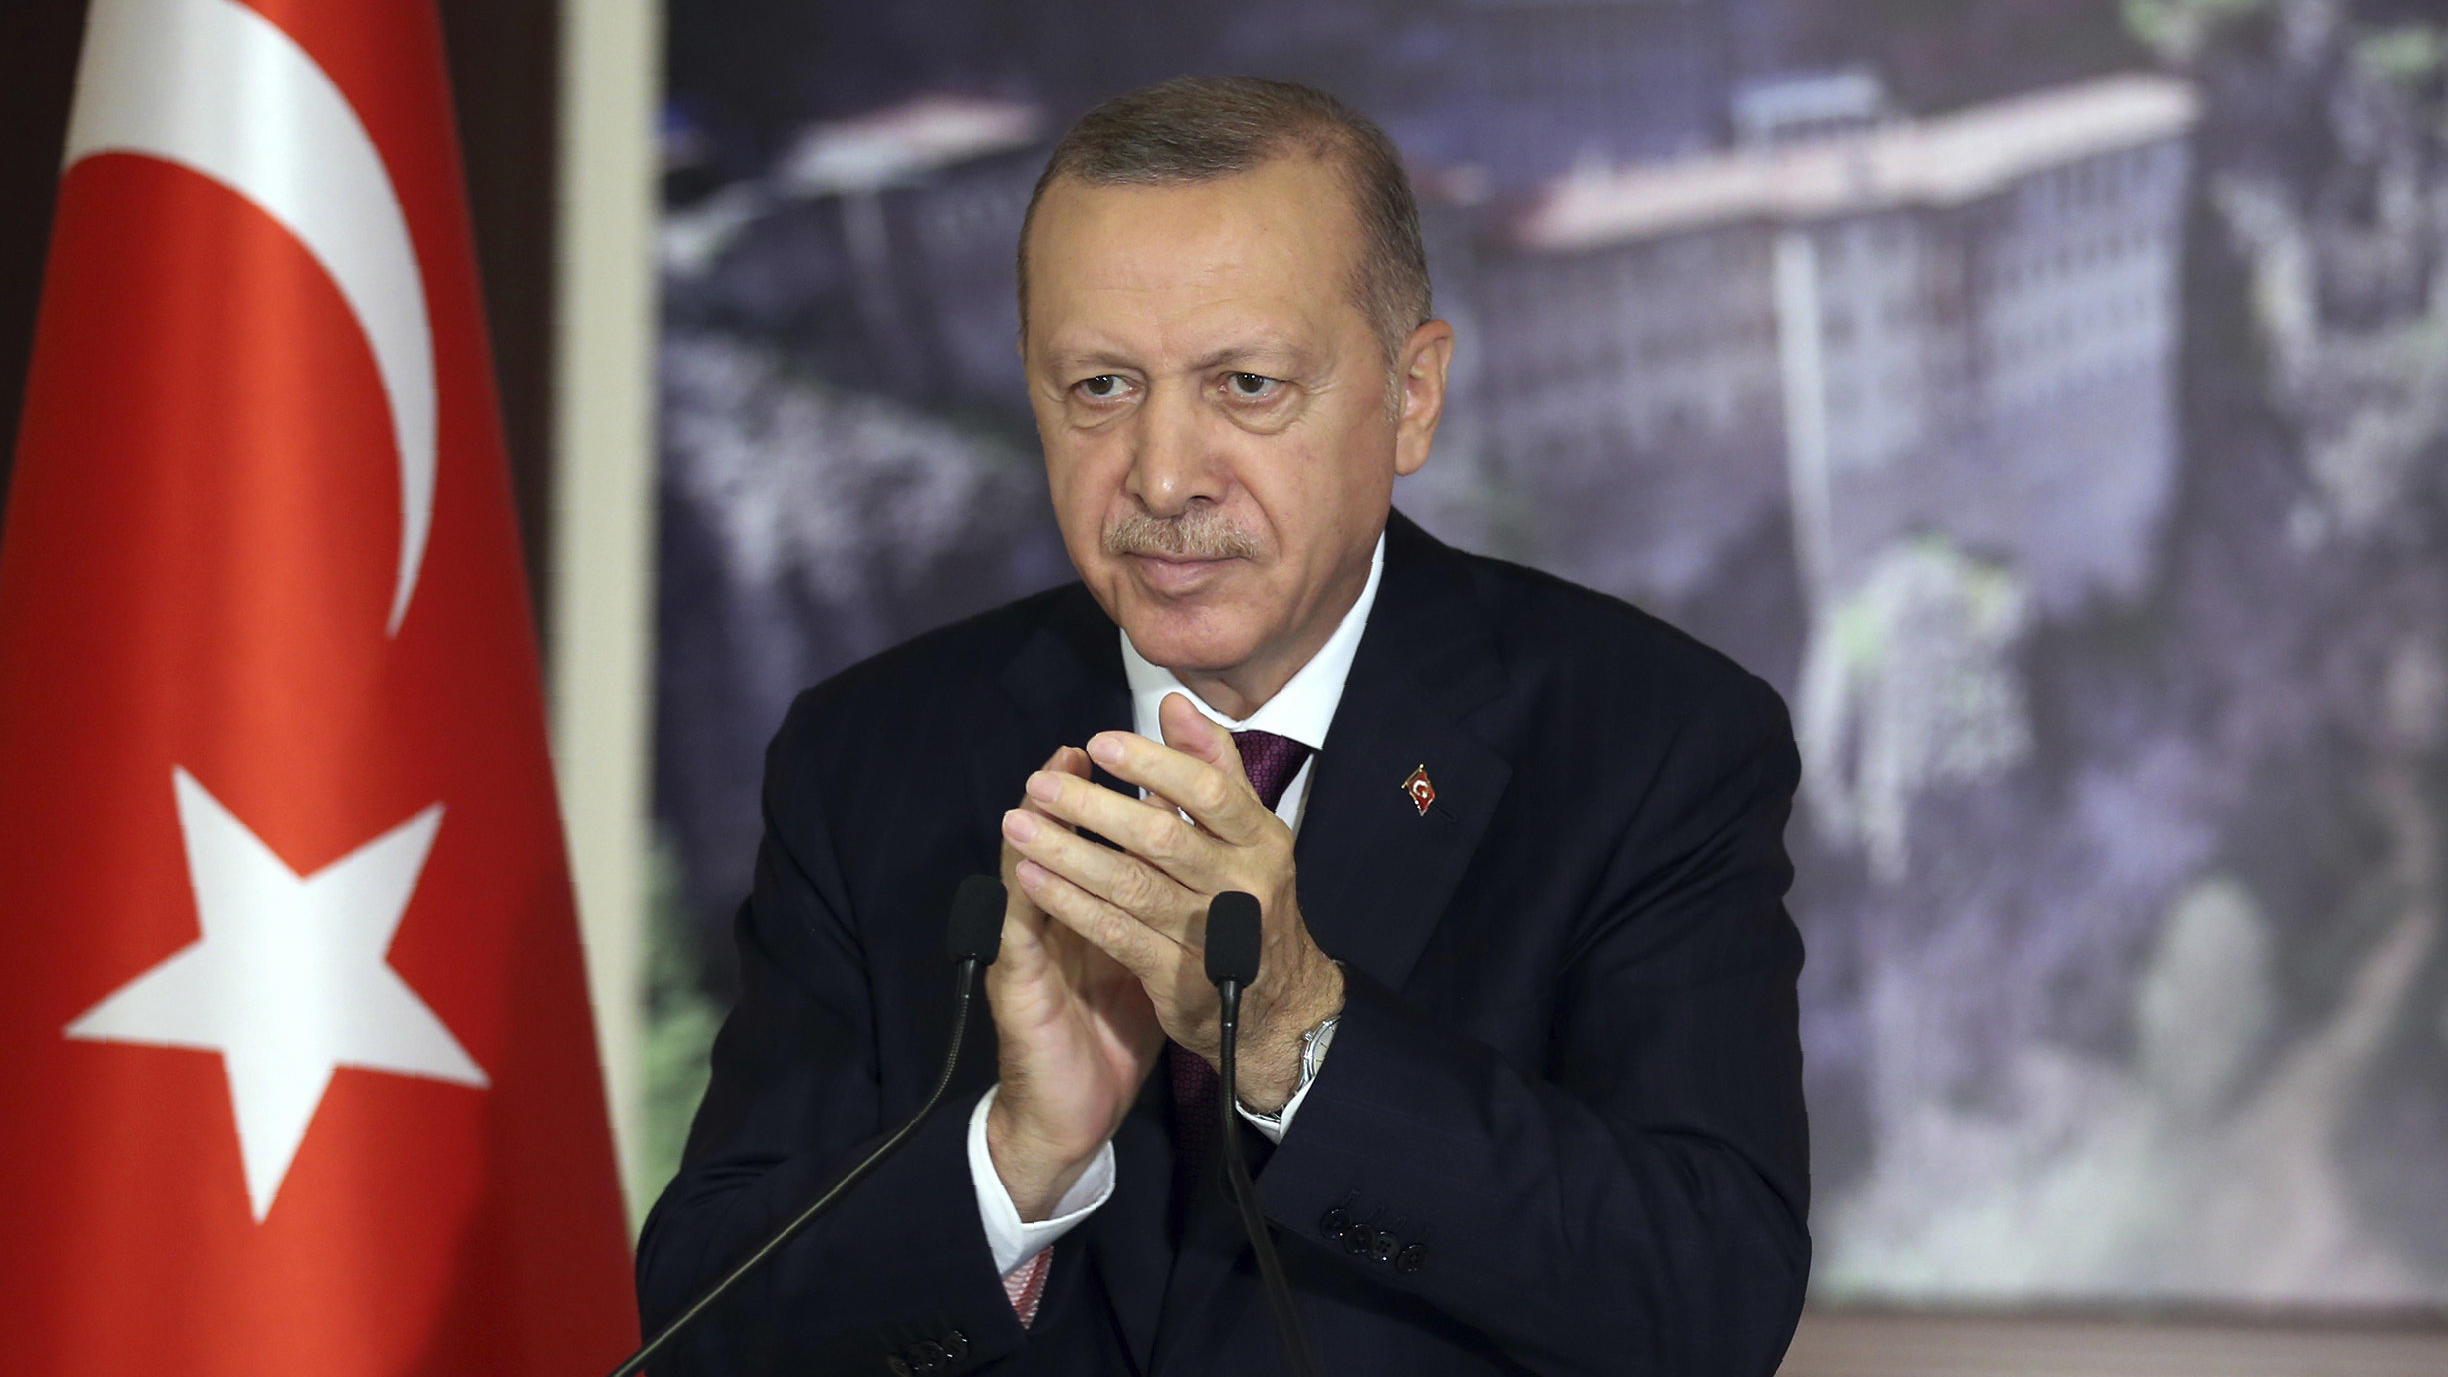 Turkey's President Recep Tayyip Erdogan applauds during a conference in Istanbul, Tuesday, July 28, 2020. Turkish lawmakers were making their final speeches Tuesday before voting on a bill that would give the government greater powers to regulate soc